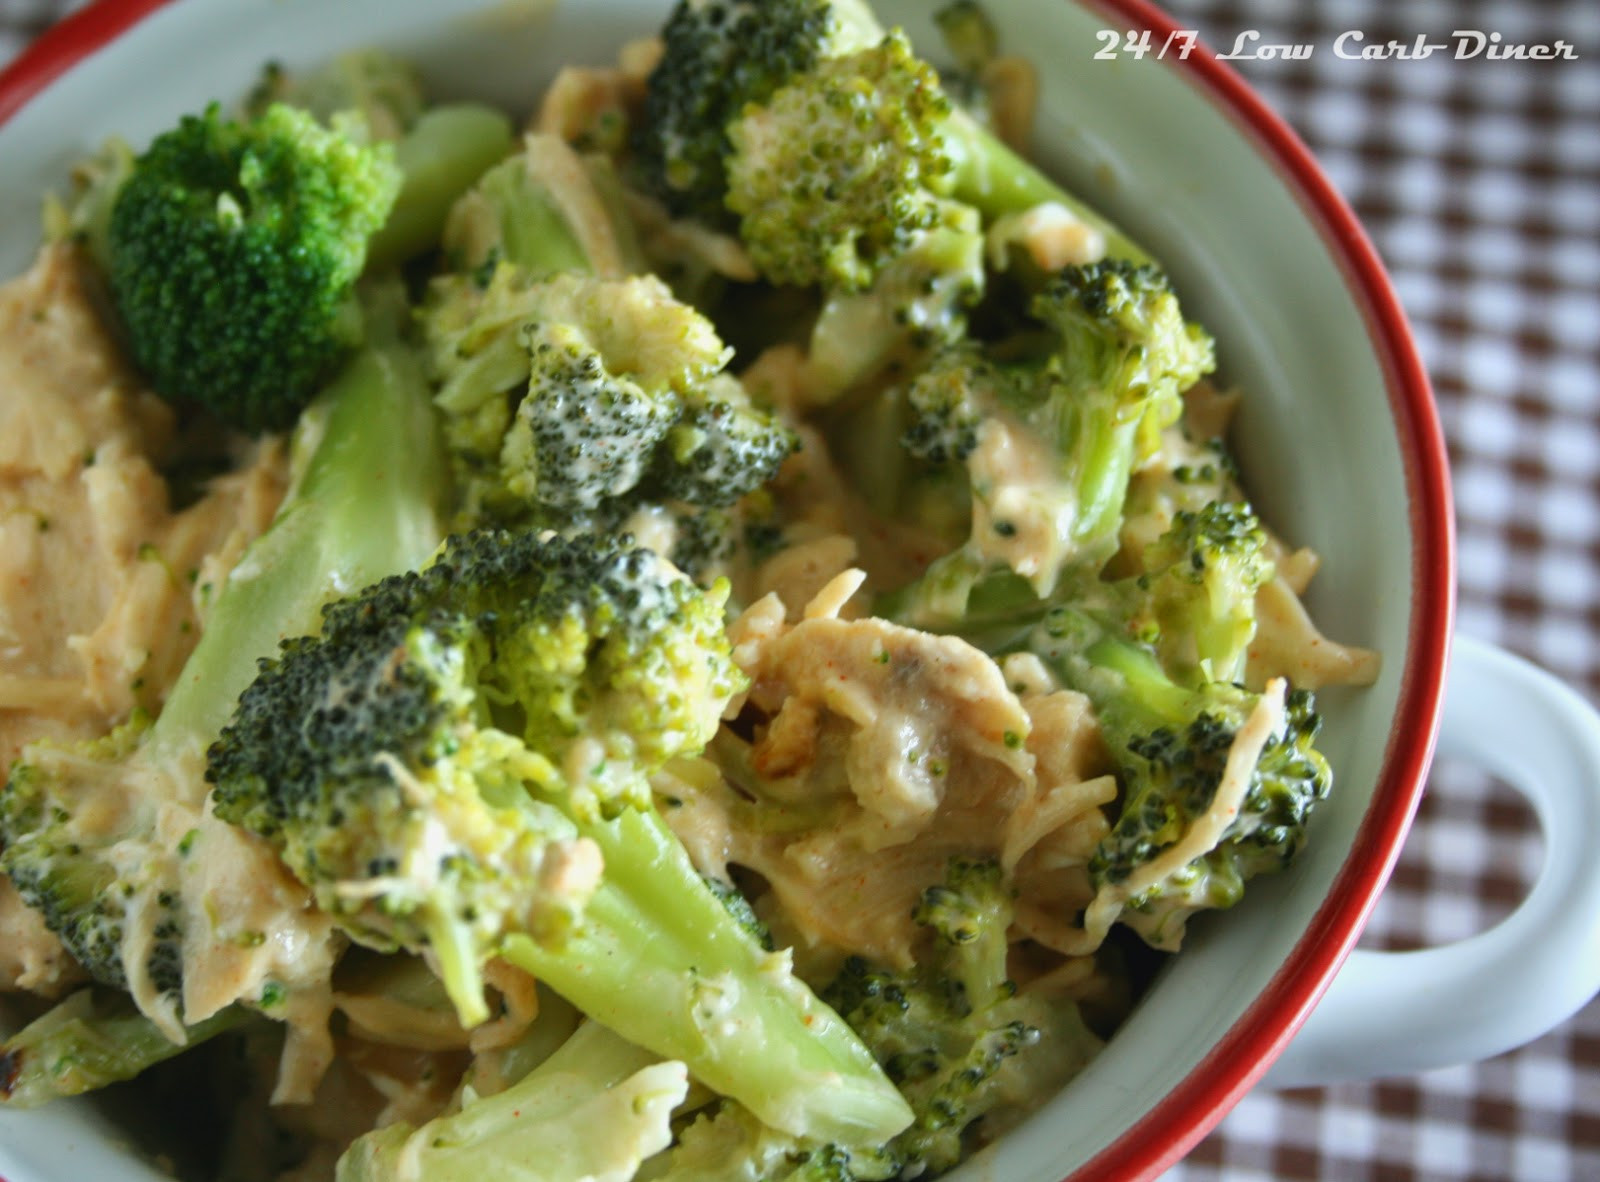 Broccoli Chicken Casserole
 24 7 Low Carb Diner Chicken and Broccoli Casserole for 2